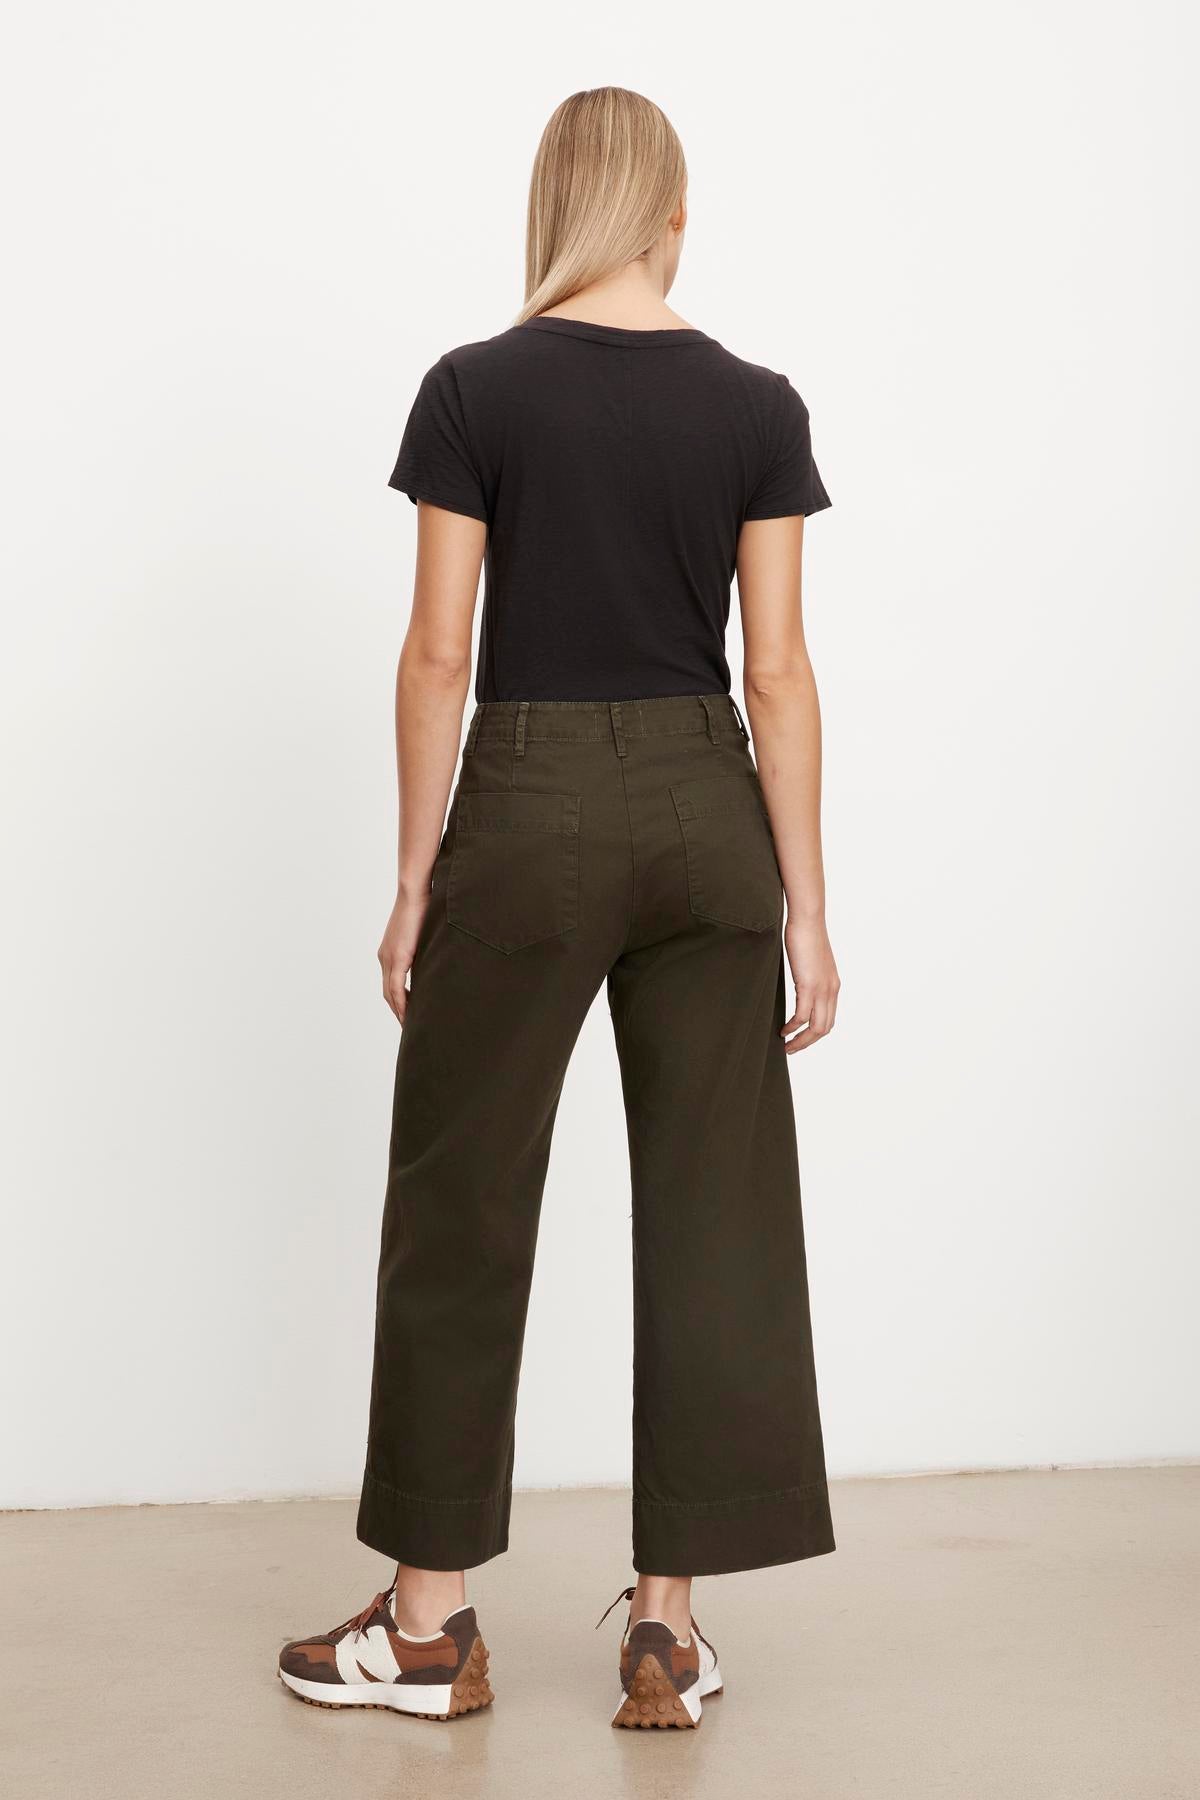   The back view of a woman wearing Velvet by Graham & Spencer's MYA COTTON CANVAS PANT in olive green cropped trousers. 